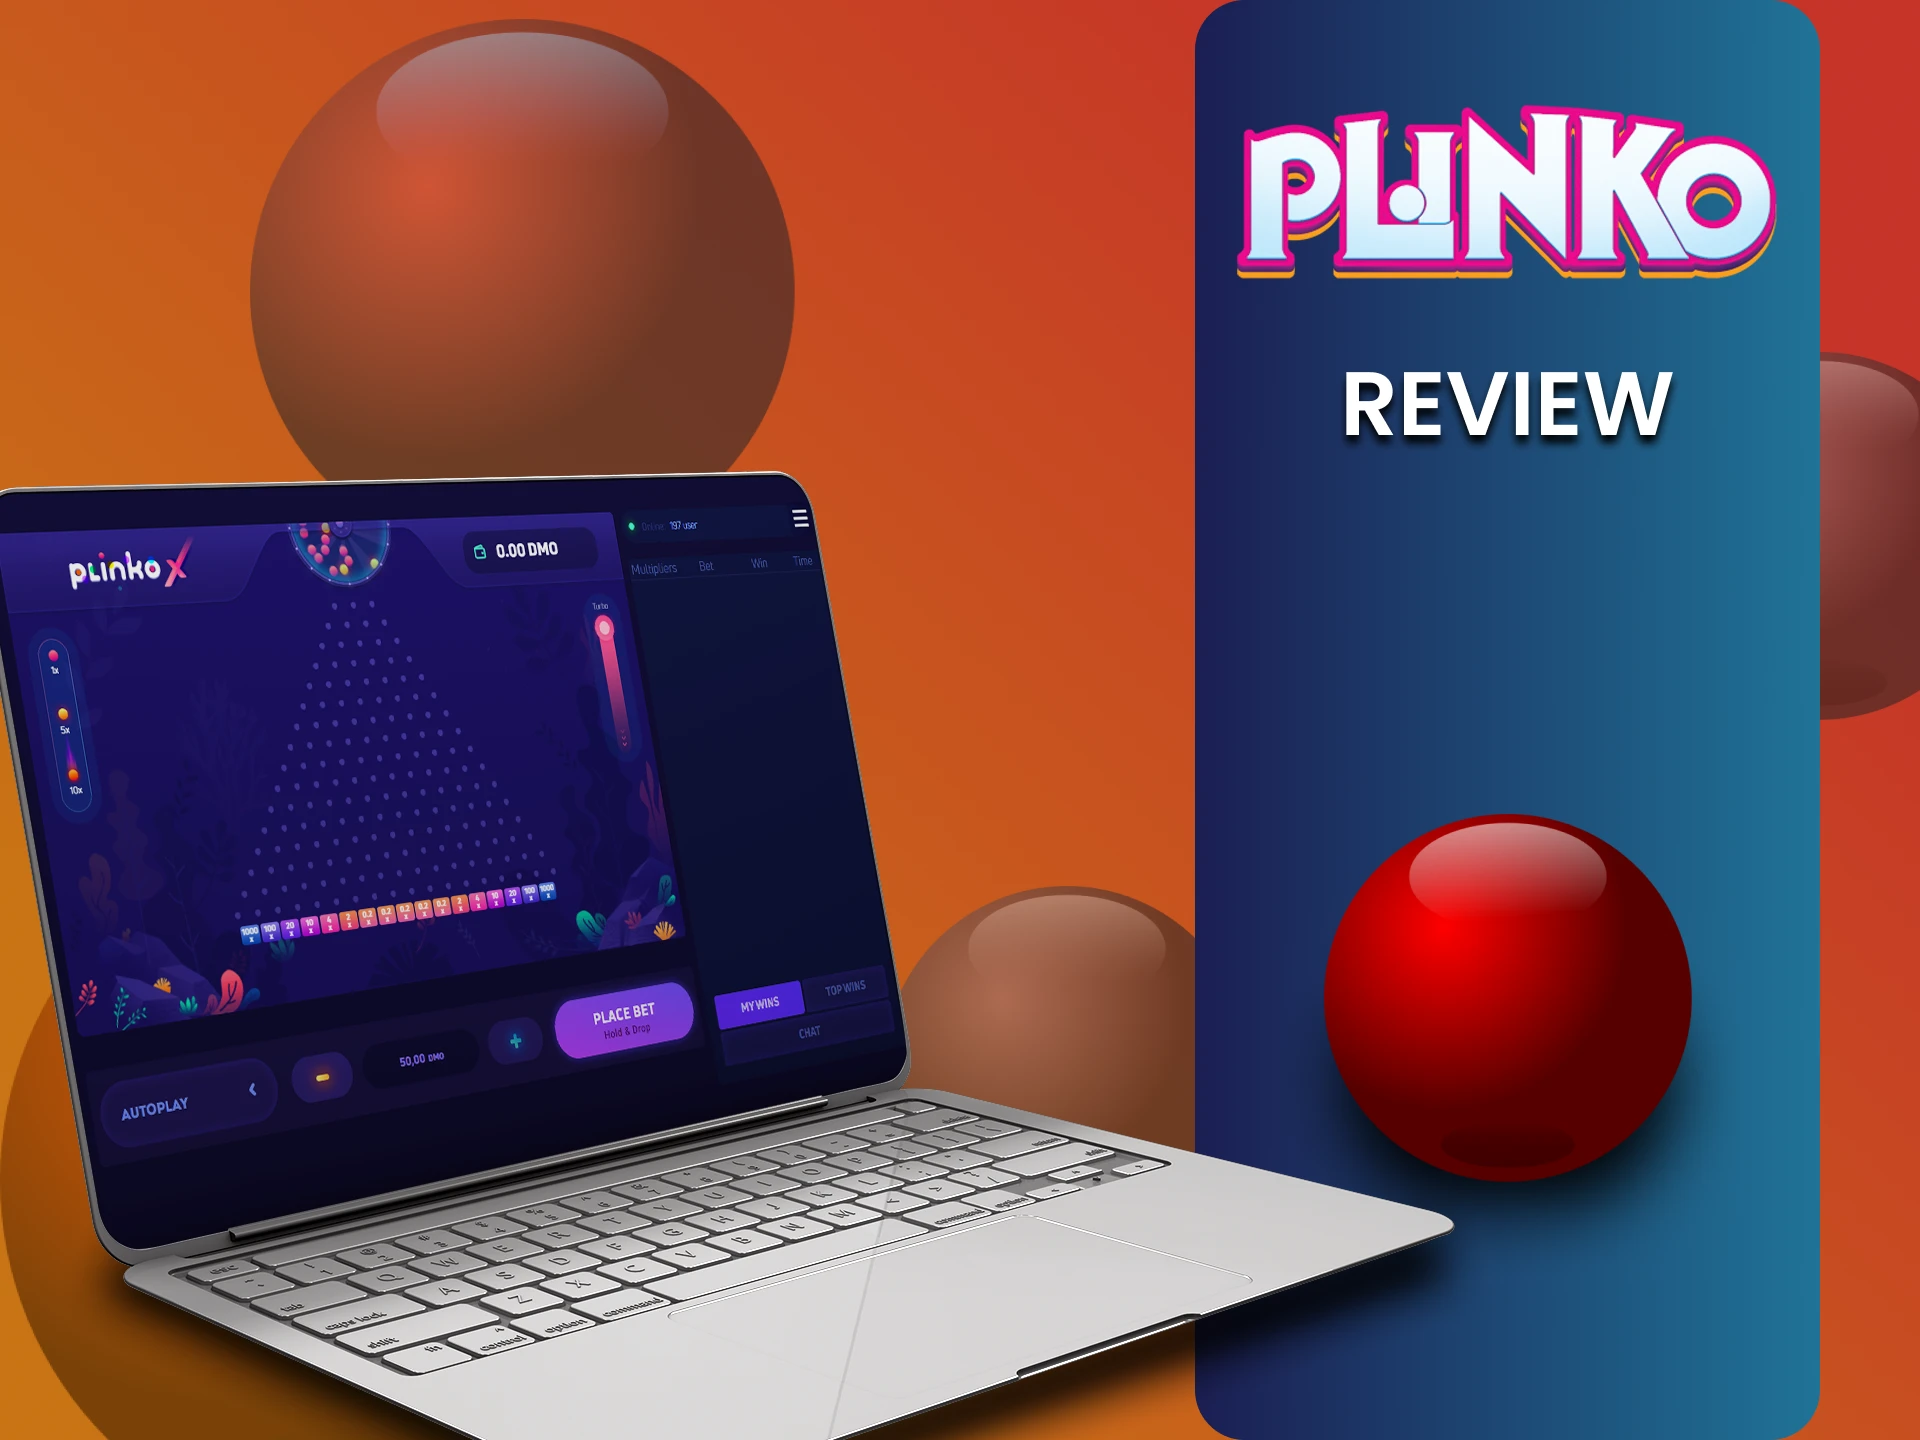 Learn all about the Plinko game.